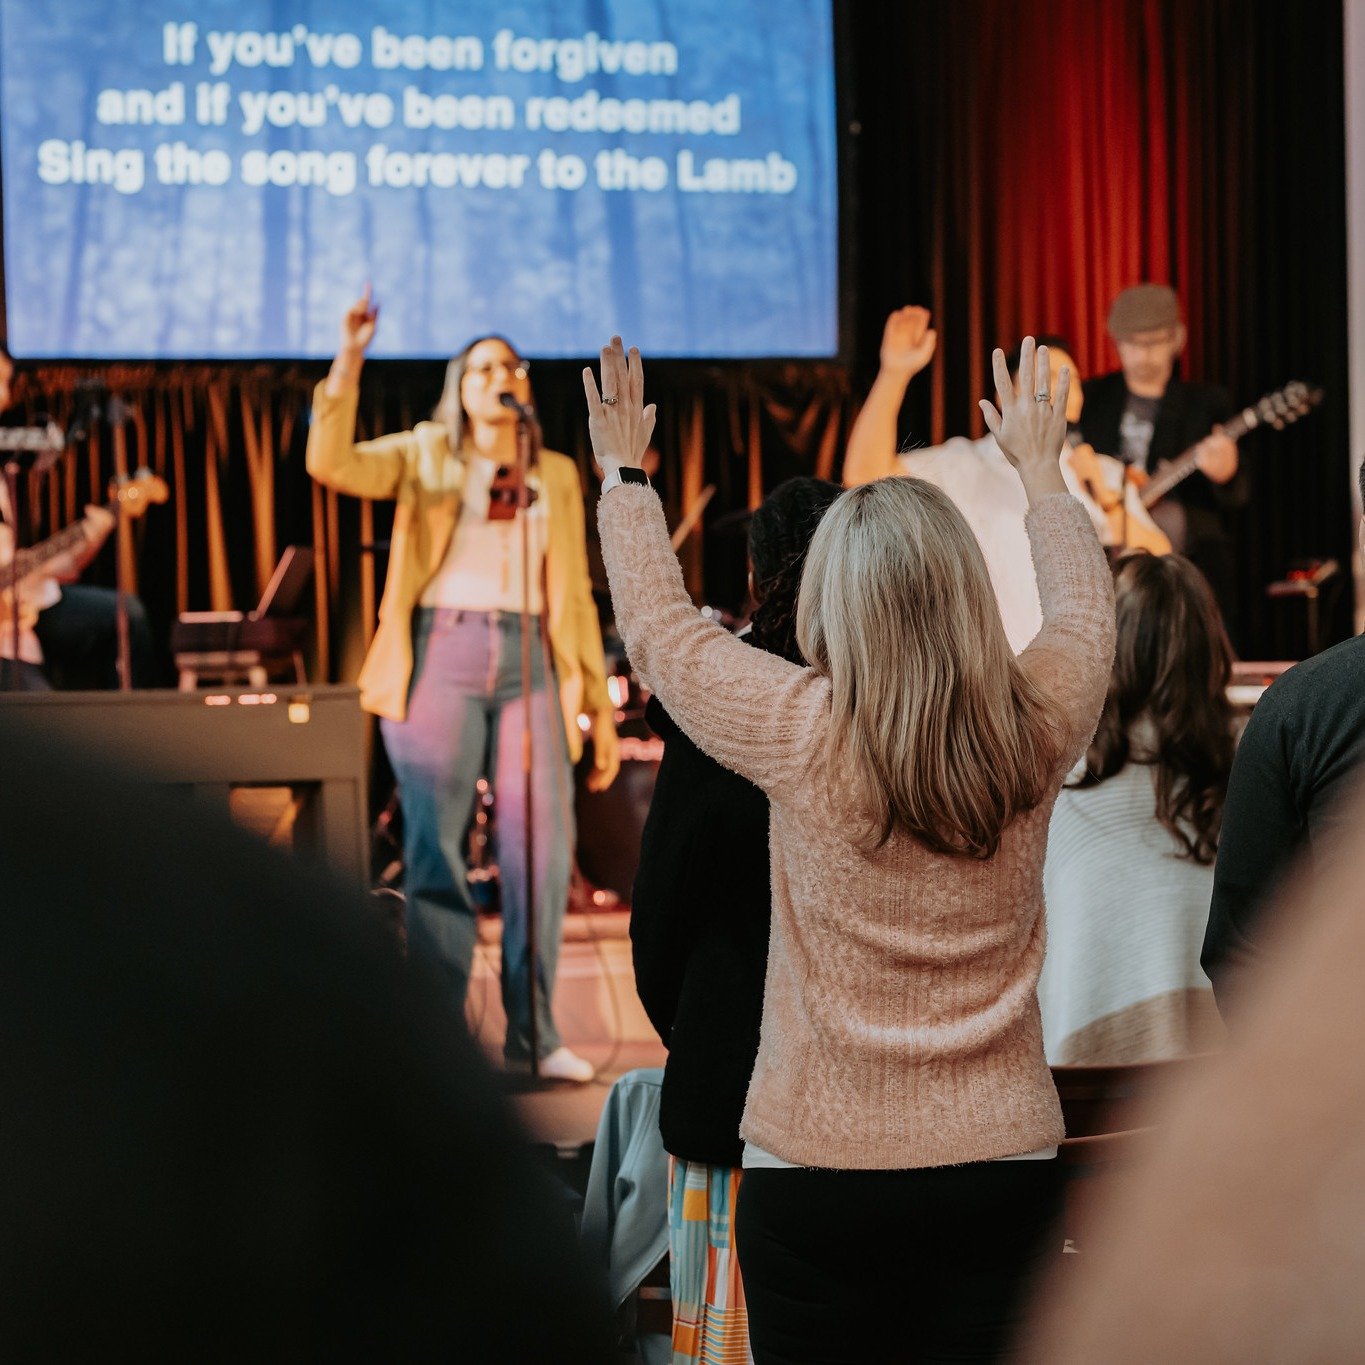 🌟 &quot;An anthem isn't meant to be sung alone.&quot; 🌟 

We believe in the power of community and the strength we find when we come together in faith. Whether you're a longtime member or just exploring, you're a vital part of our Anthem family. Le